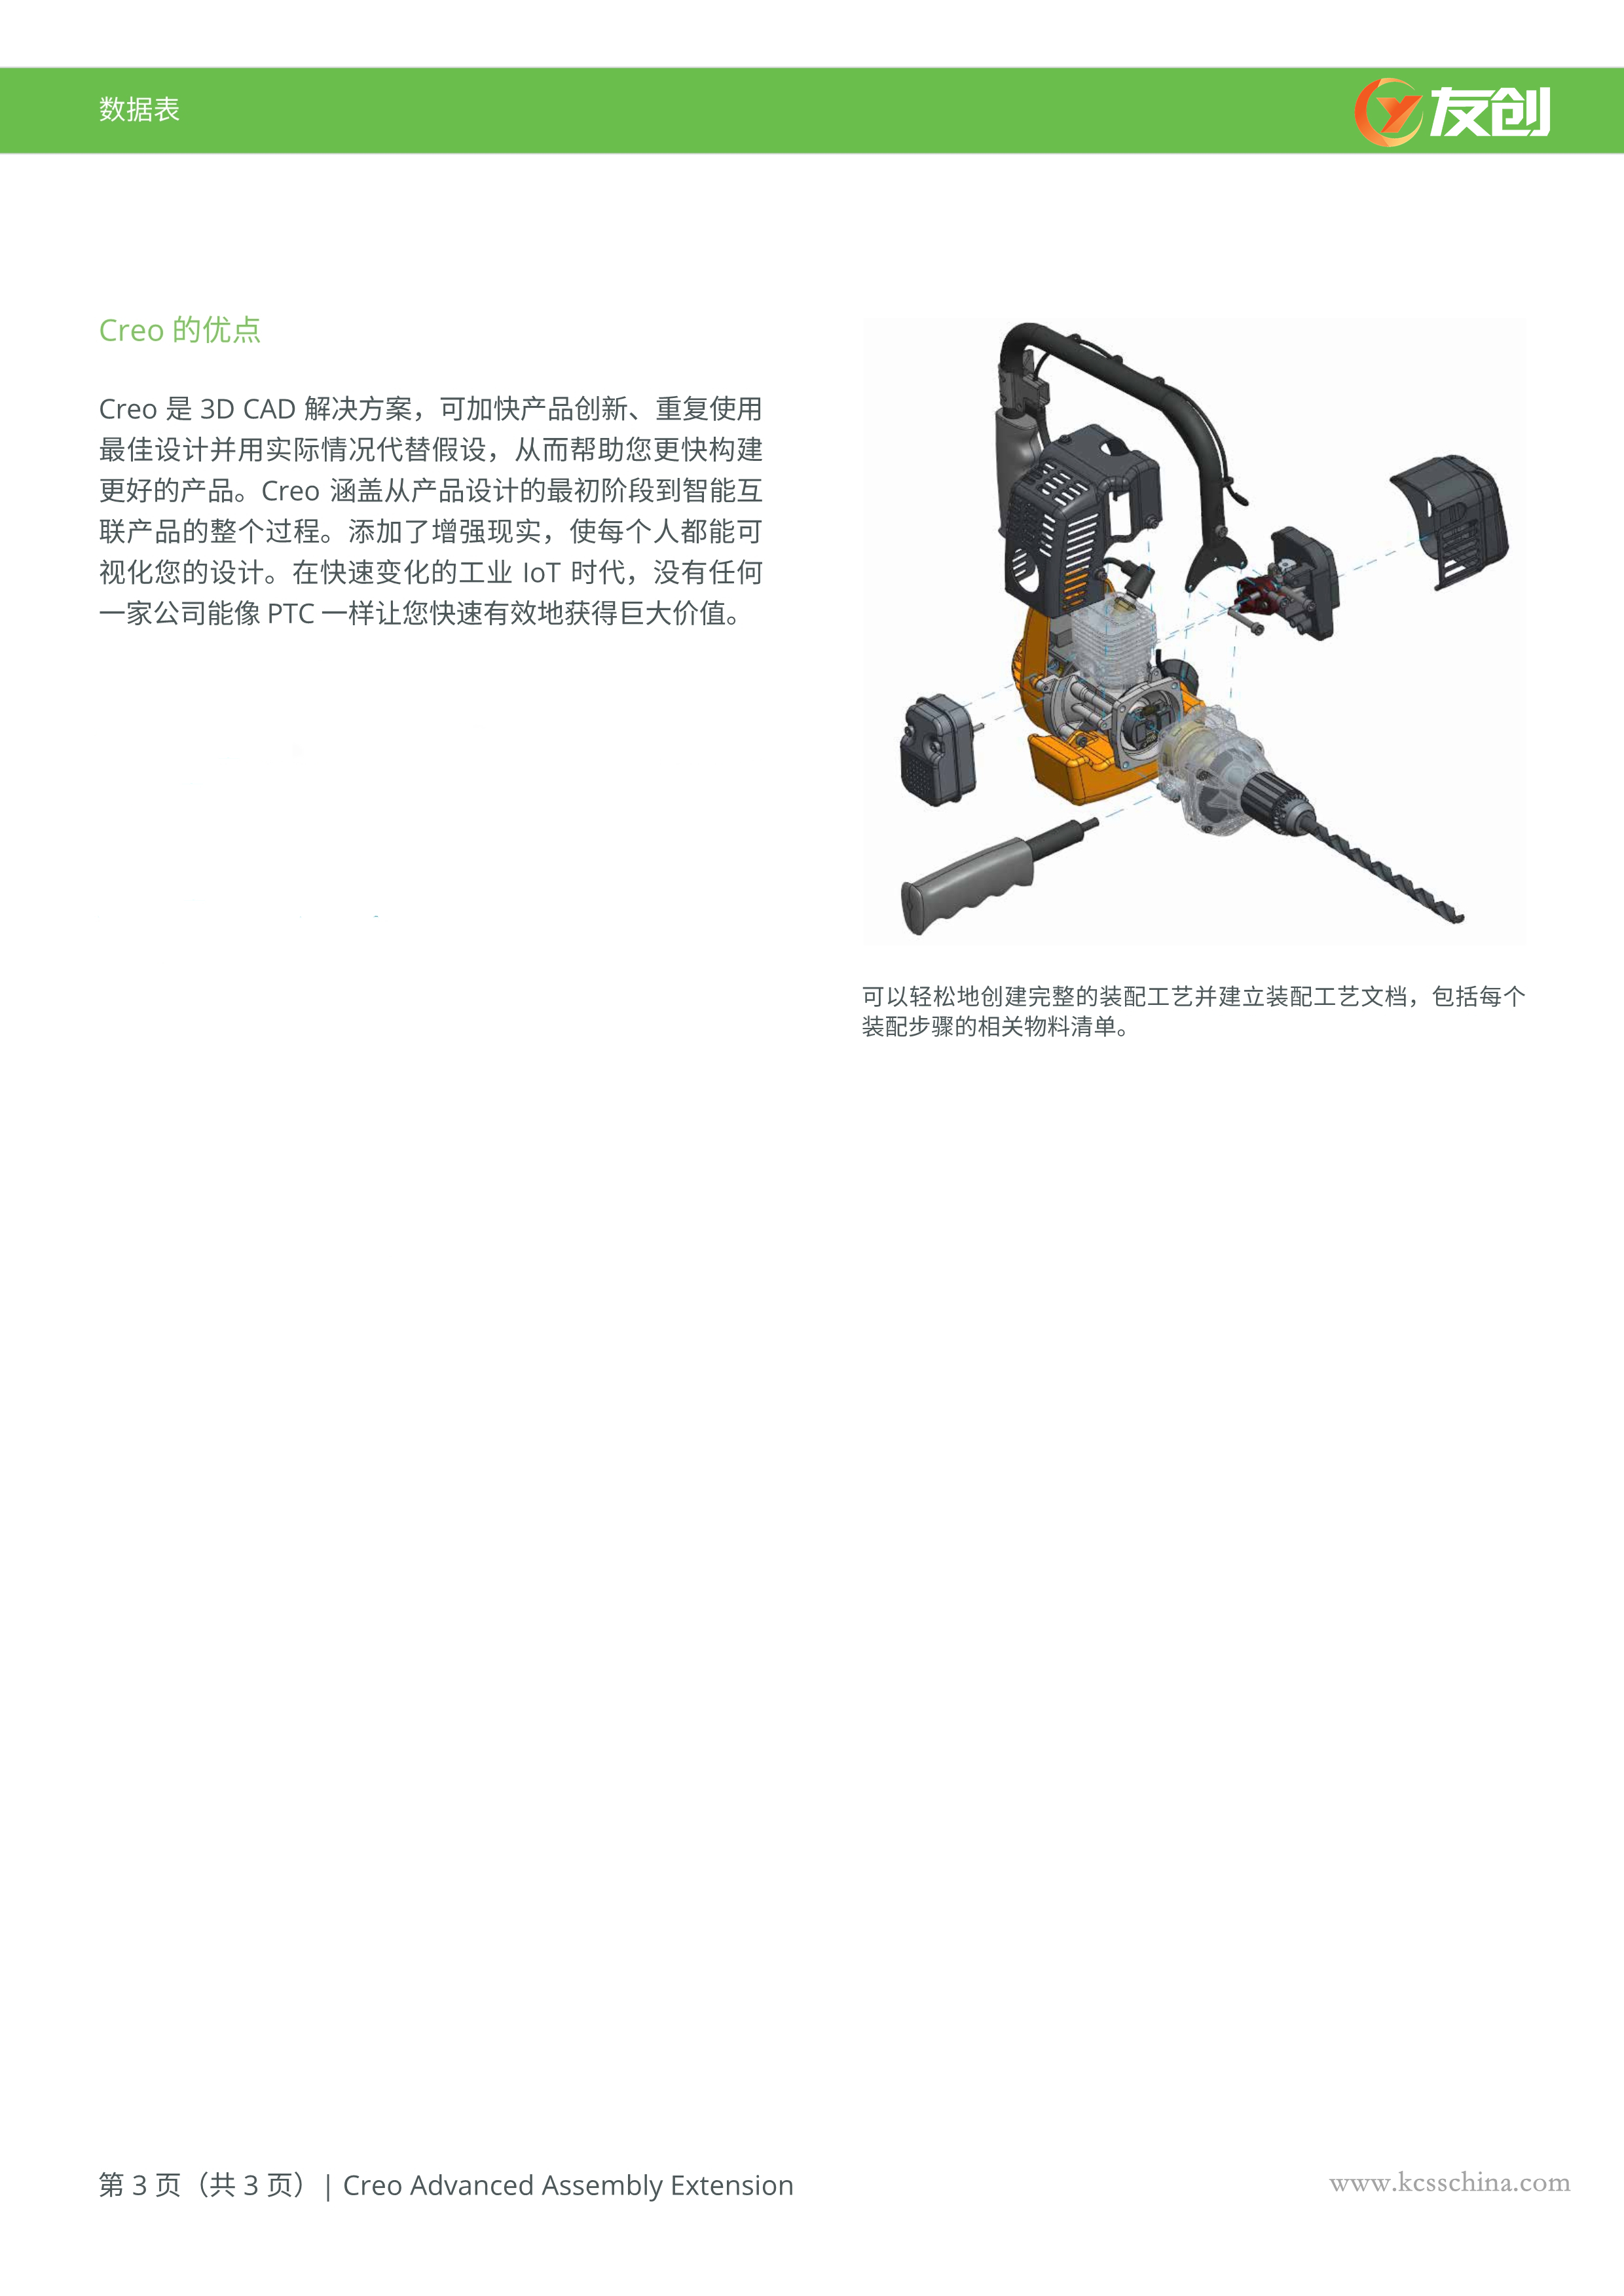 Creo Advanced Assembly Extension Data Sheet (Simplified Chinese)_3_副本.jpg